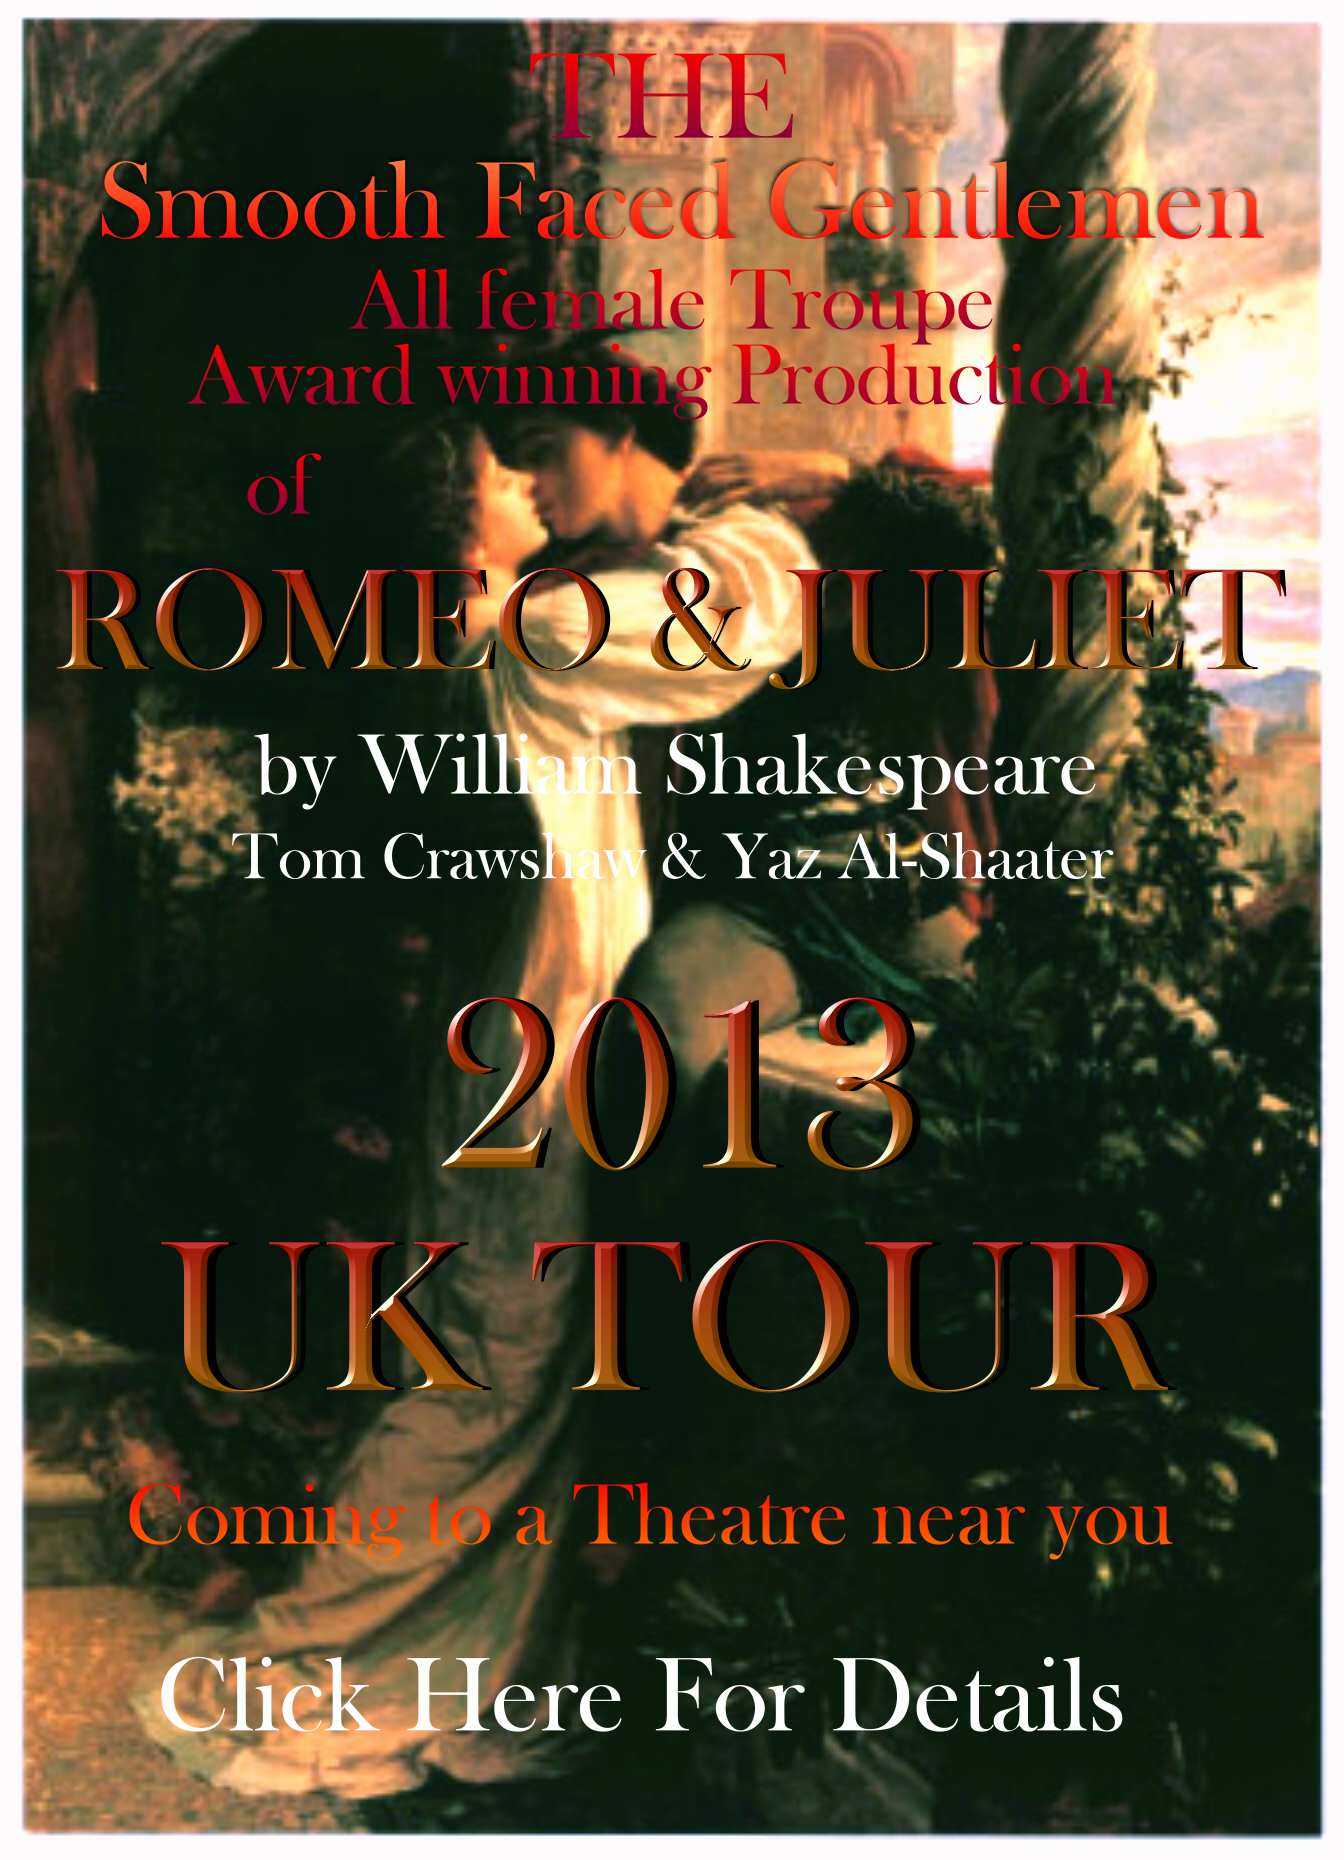 Romeo and Juliet advertising poster example